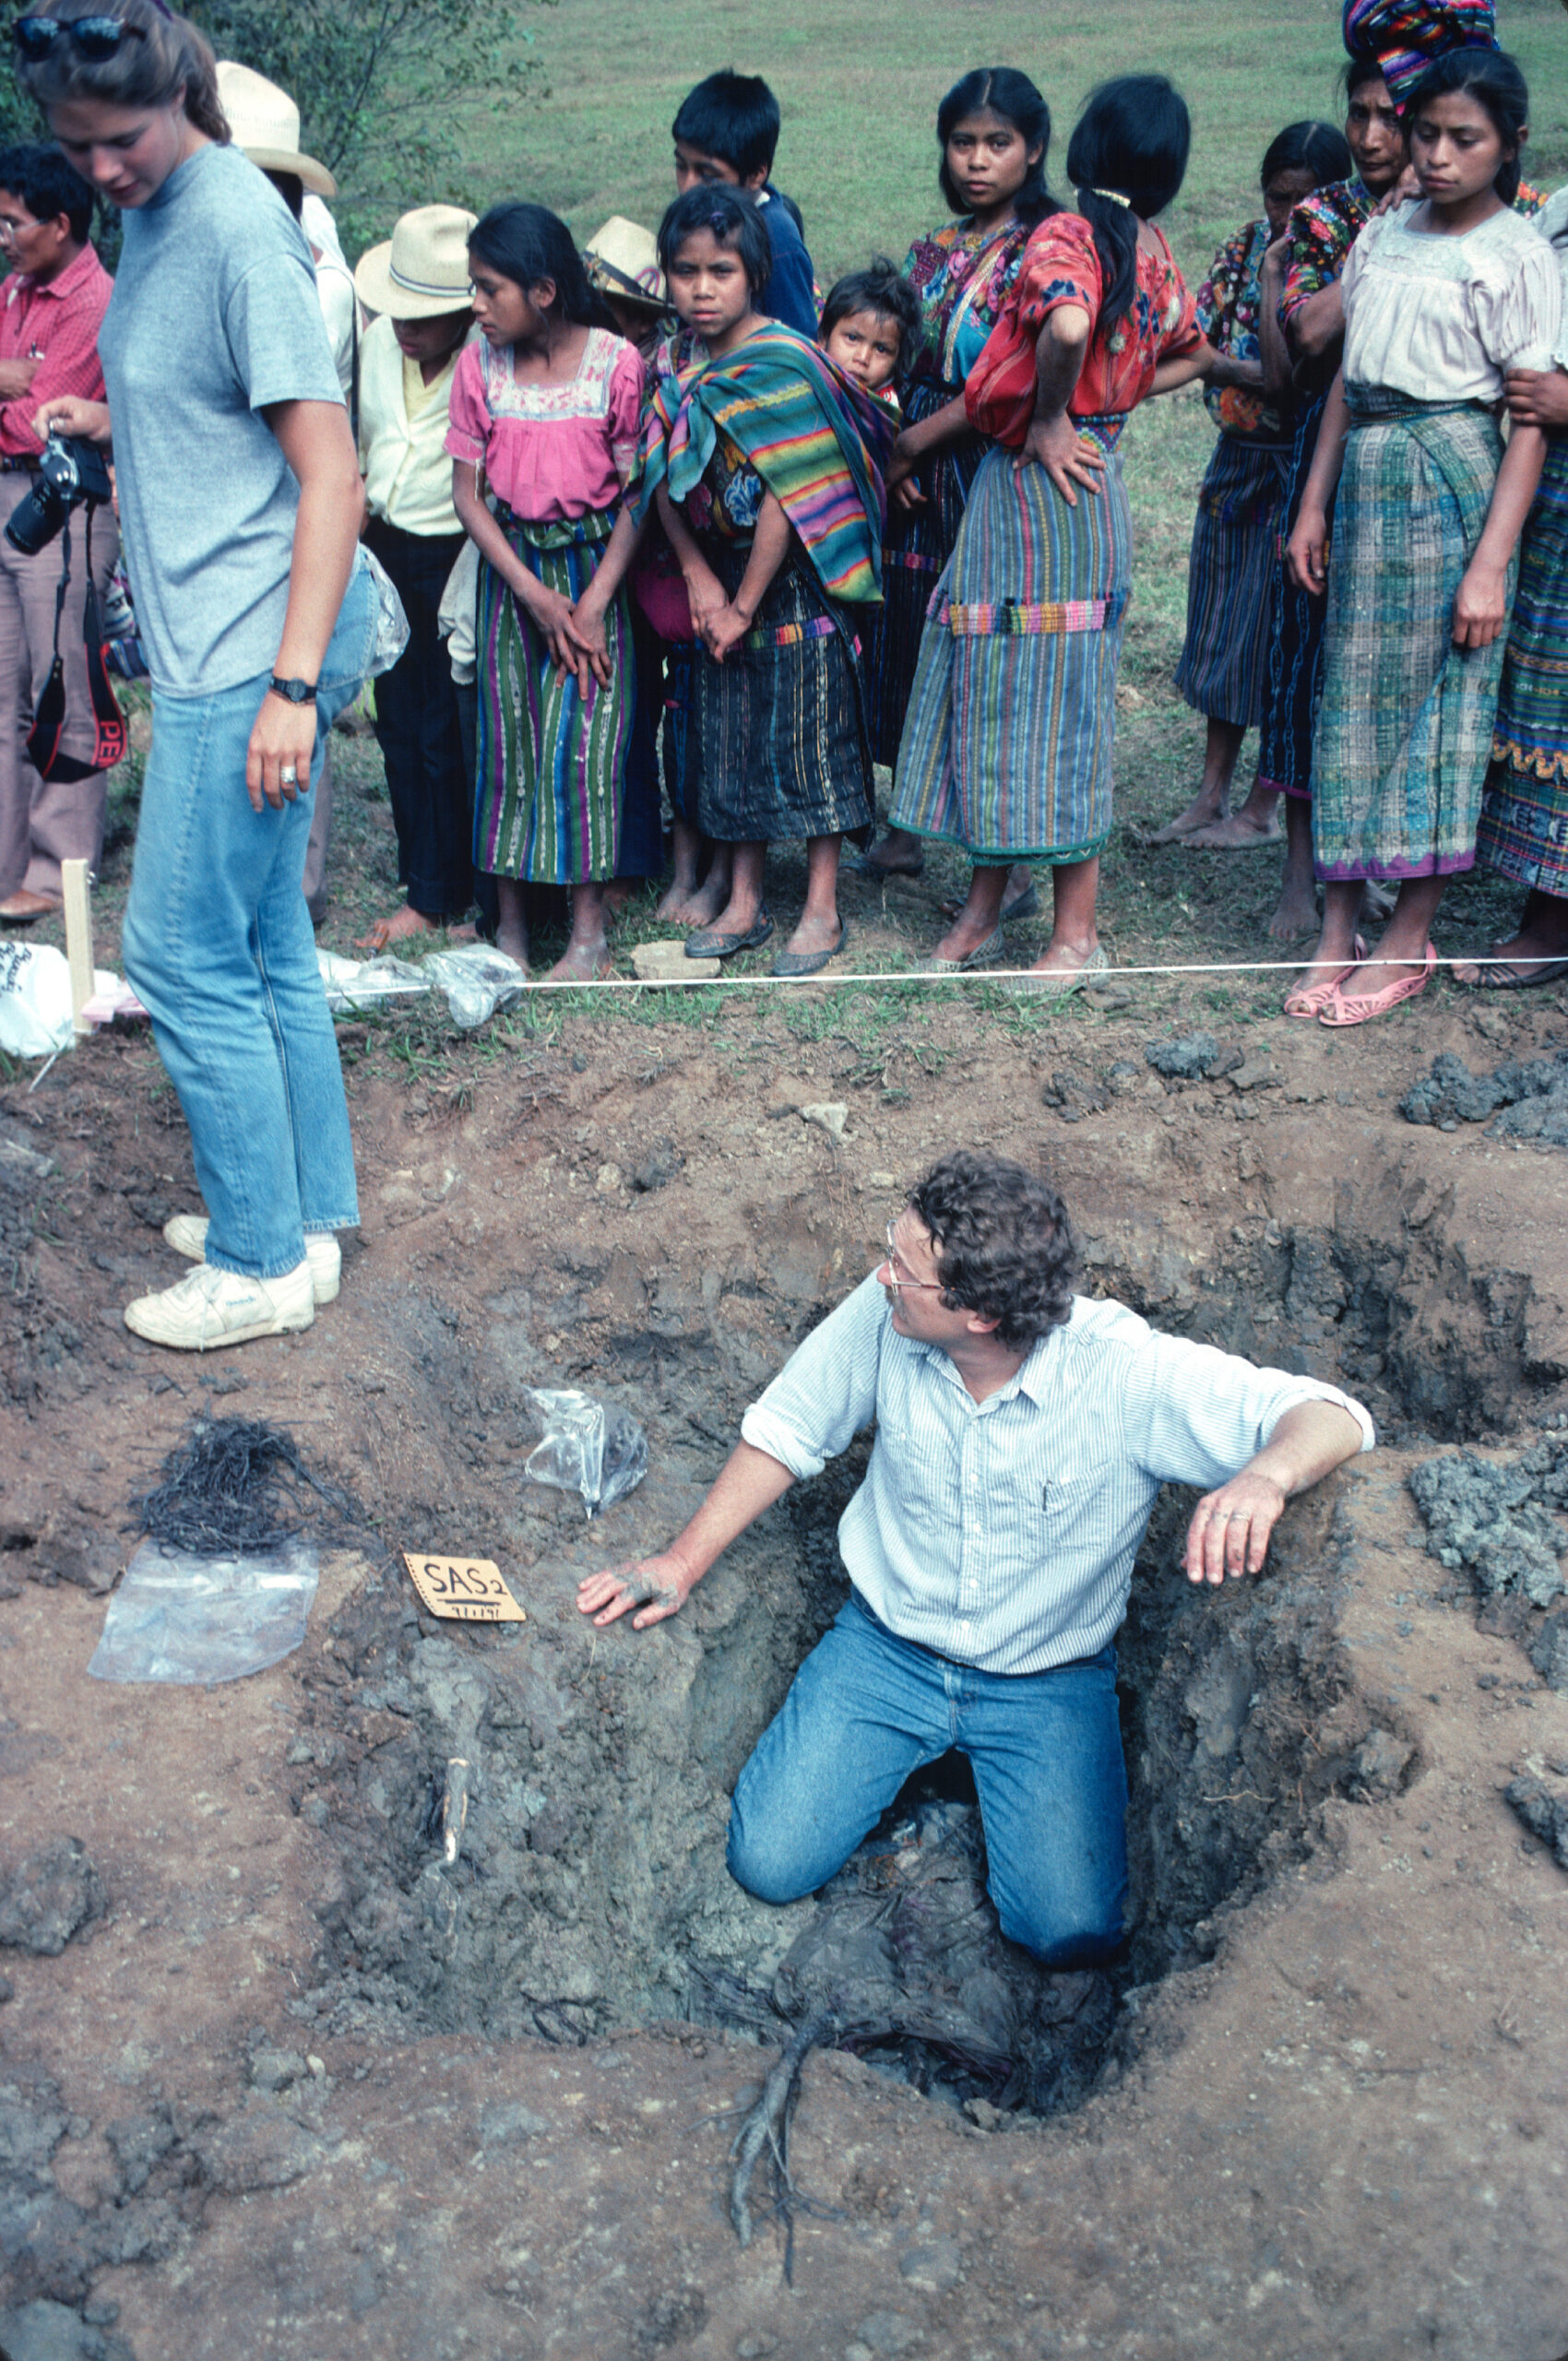 A man in a dirt hole looks up at community members watching him participate in a forensic dig.